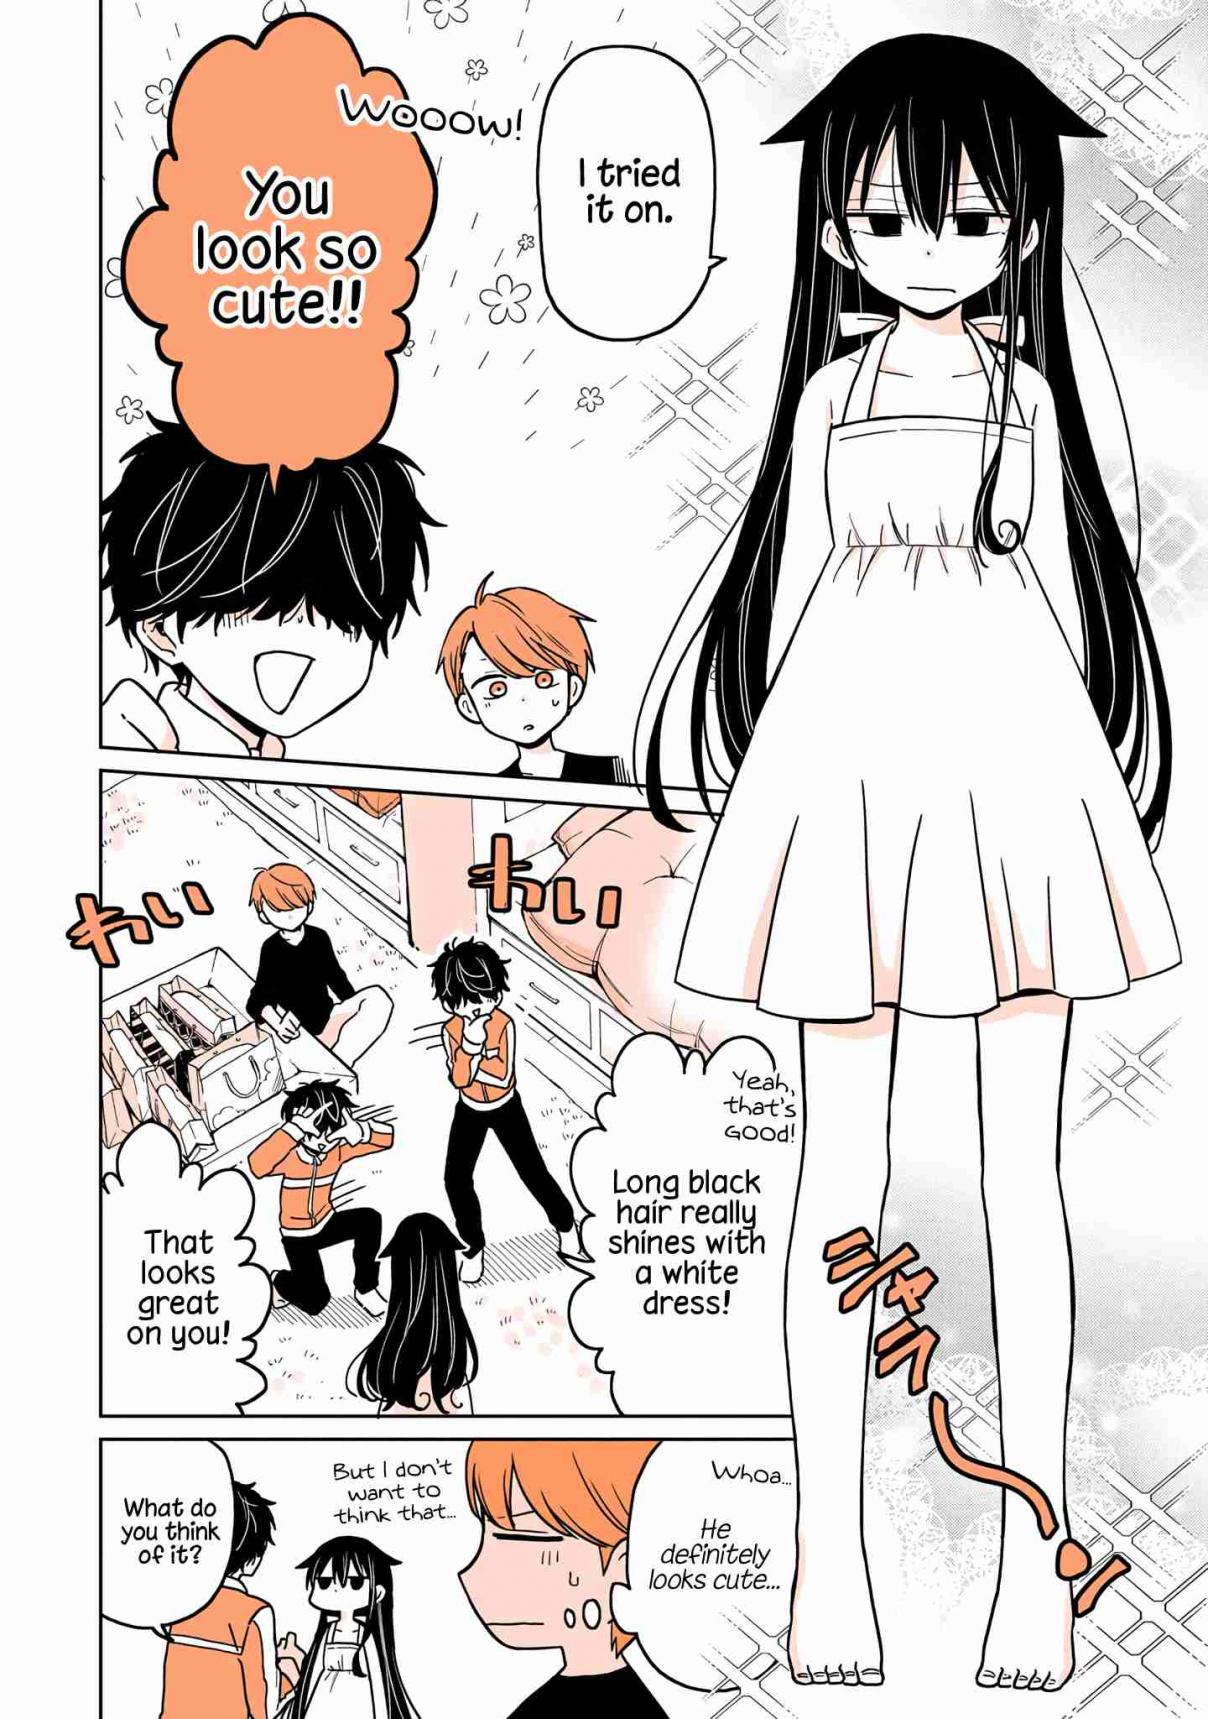 A Lazy Guy Woke Up as a Girl One Morning Vol. 1 Ch. 7